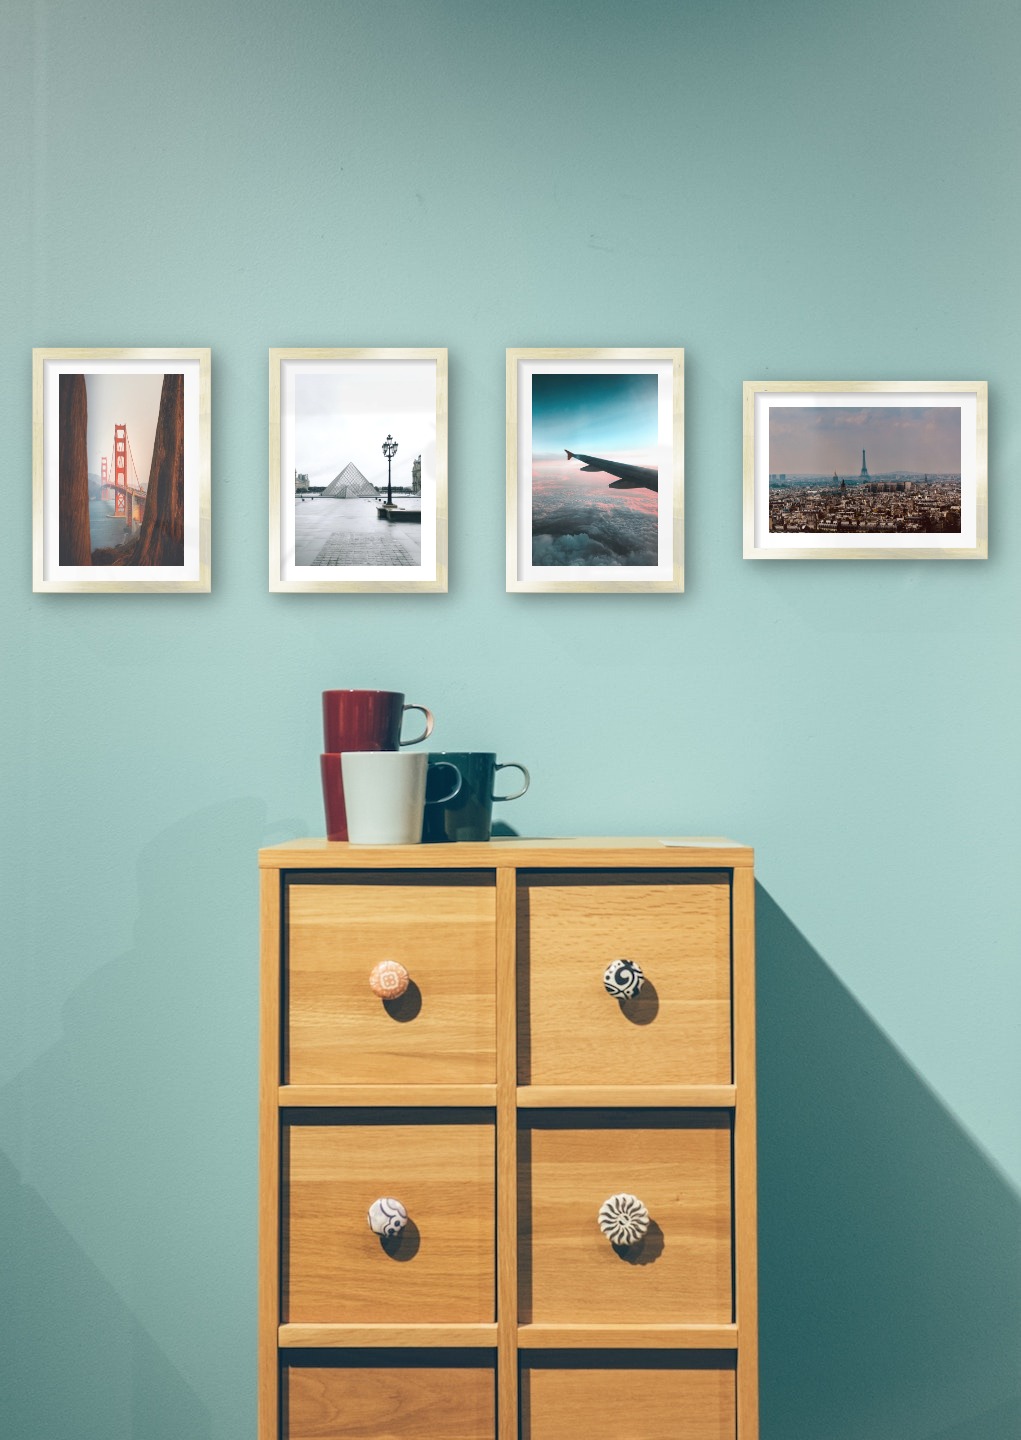 Gallery wall with picture frames in gold in sizes 21x30 with prints "Golden Gate Bridge", "Louvre in Paris", "Above the clouds" and "Eifel Tower in Paris"